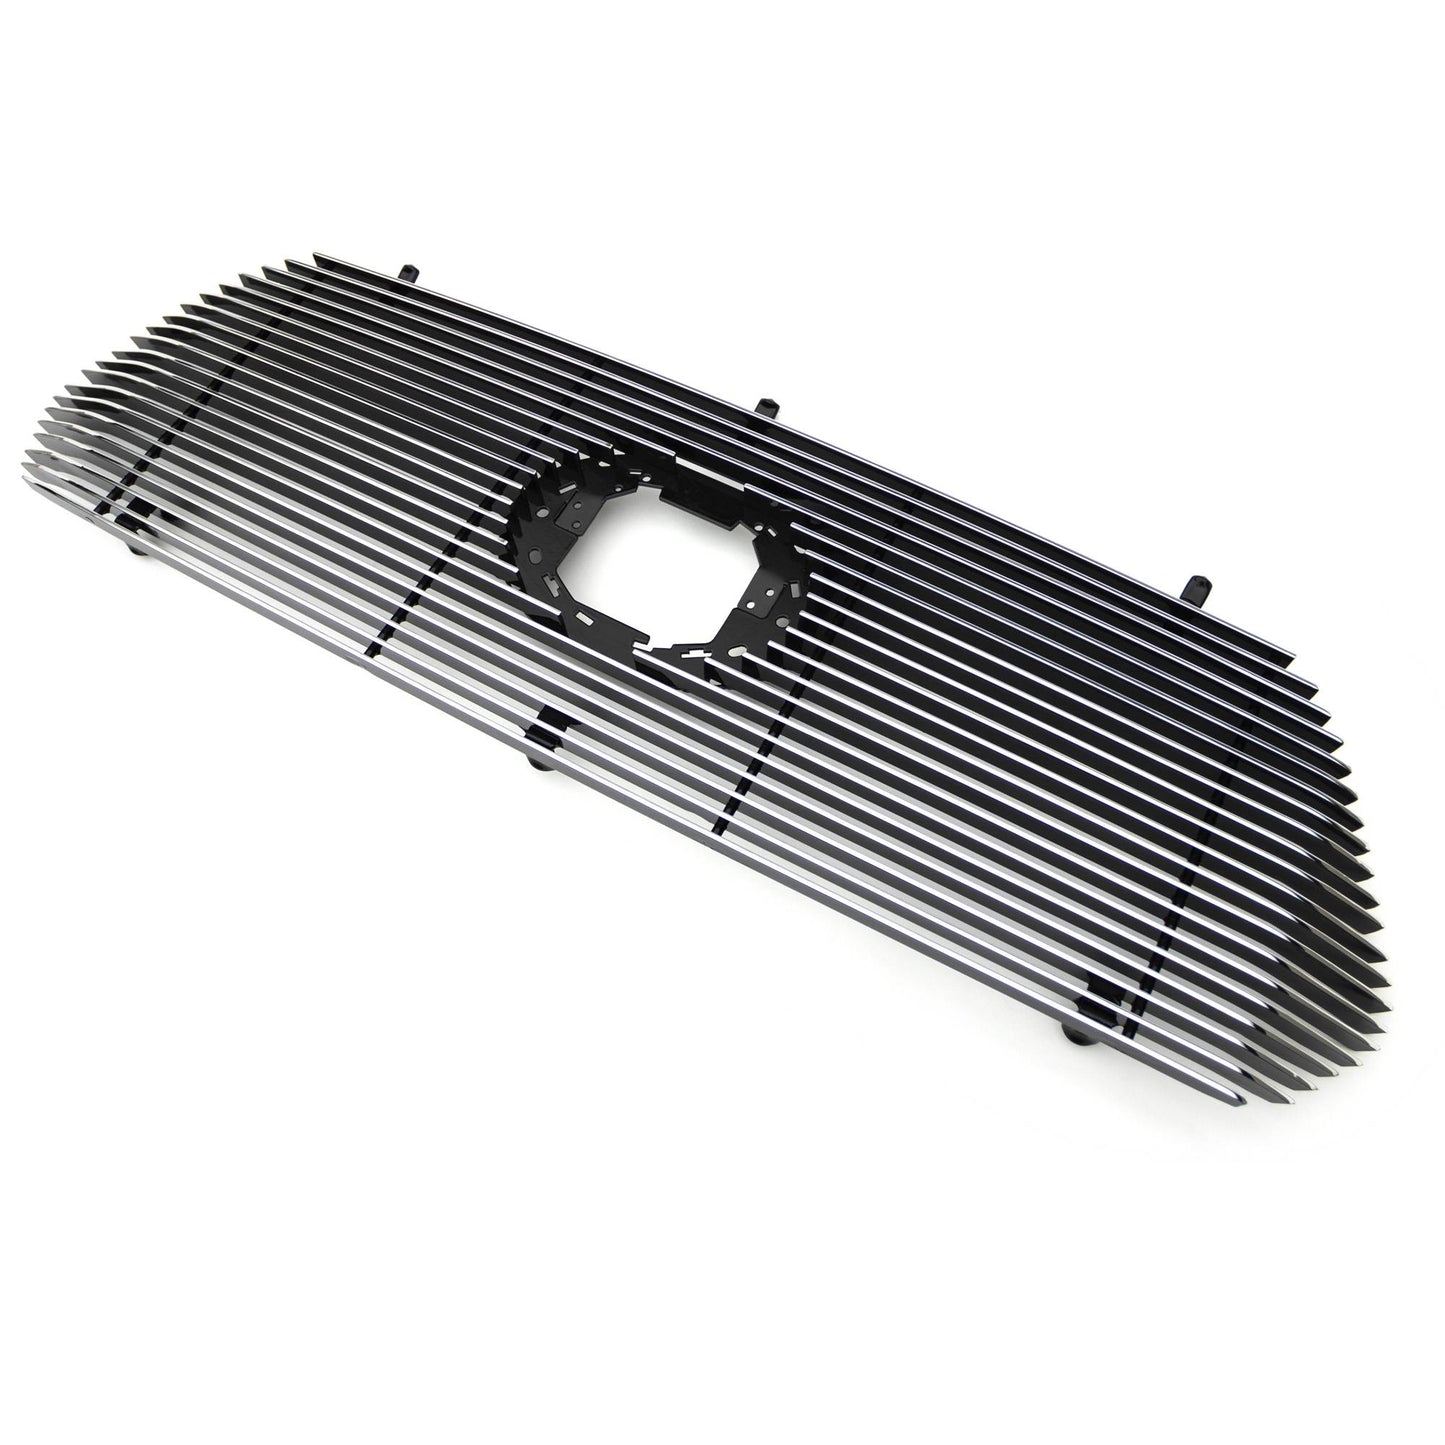 T-REX Grilles 20950 Polished Aluminum Horizontal Grille Fits 2018-2023 Toyota Tacoma